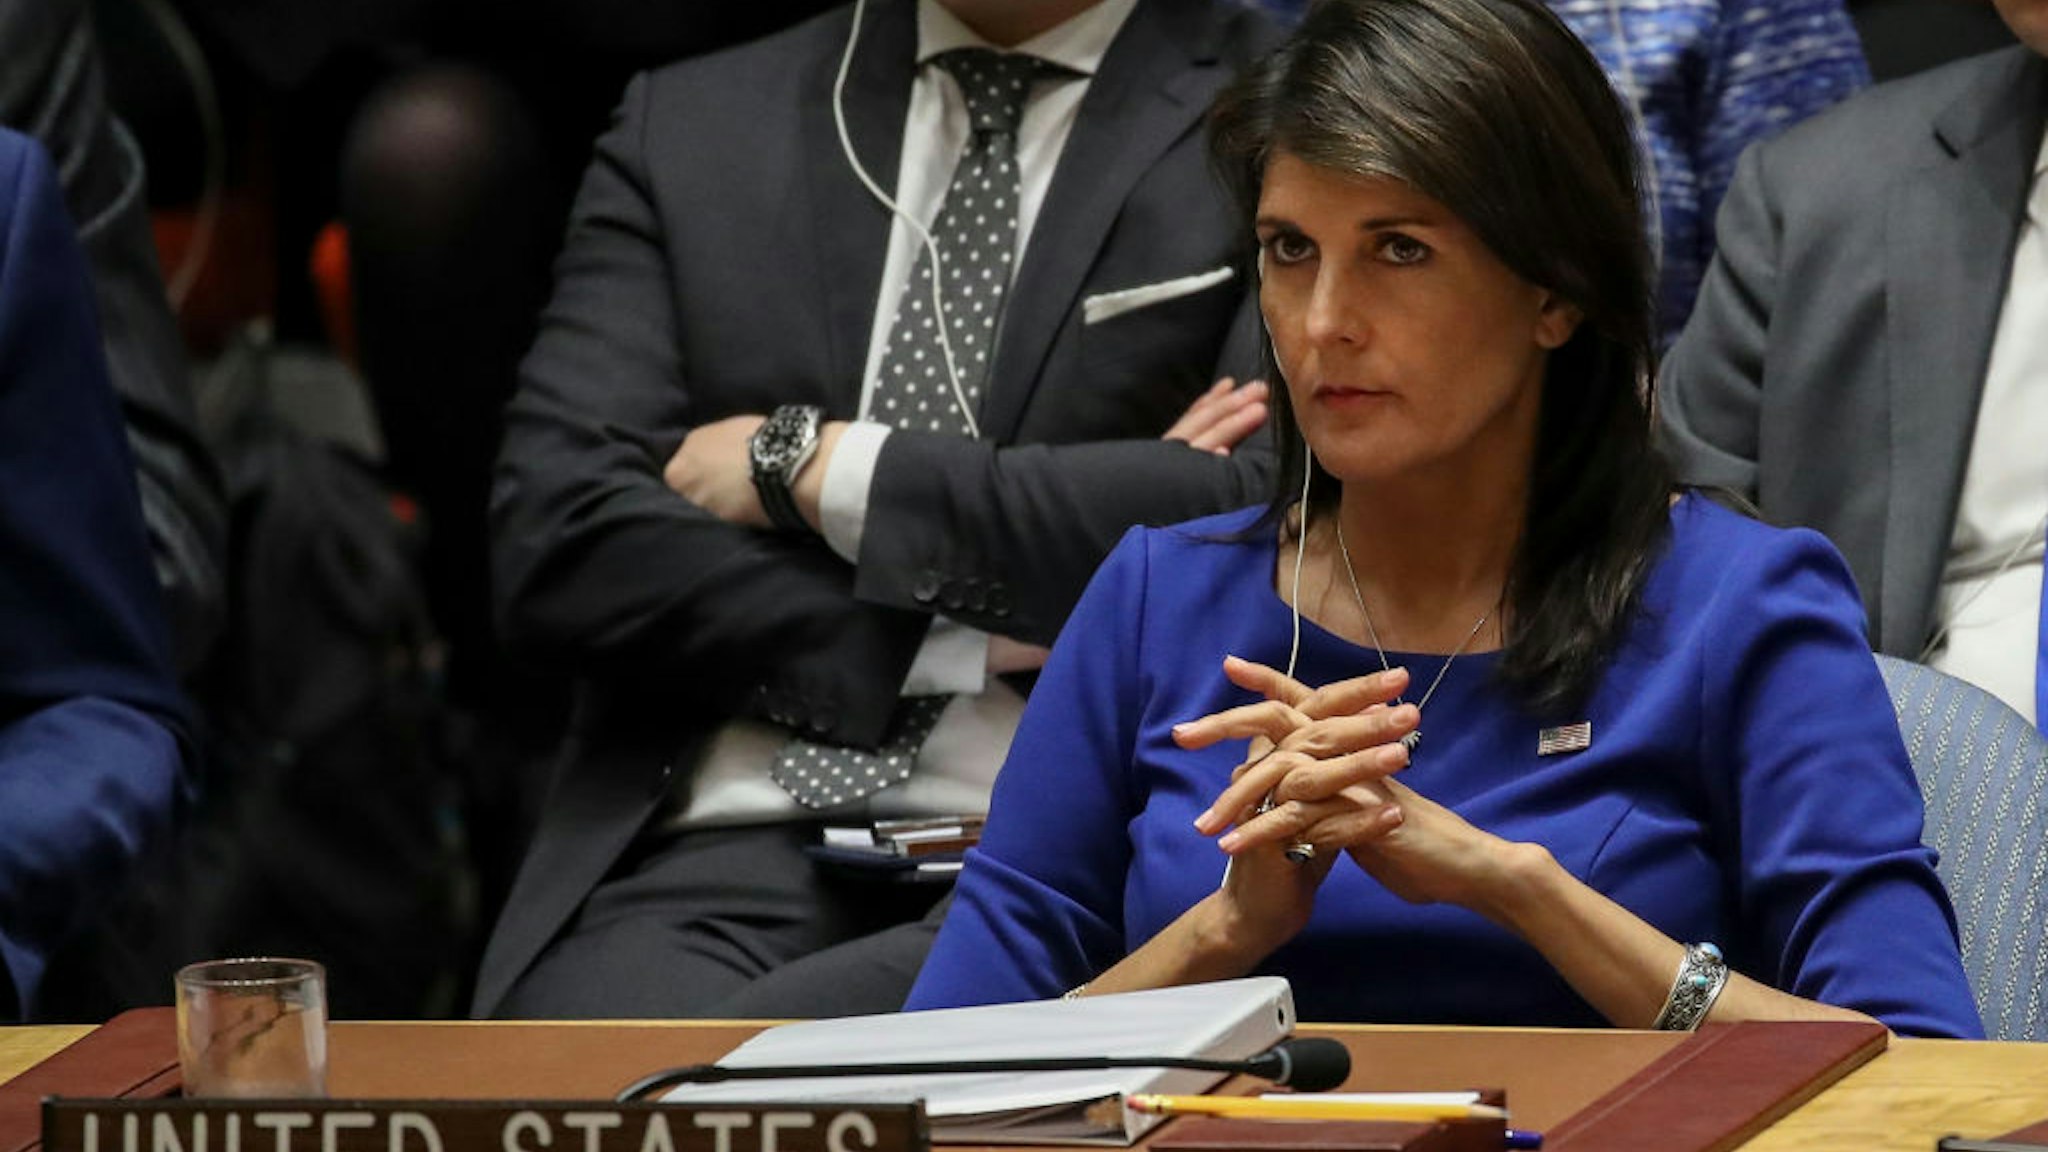 United States Ambassador to the United Nations Nikki Haley listens during a United Nations Security Council emergency meeting concerning the situation in Syria, at United Nations headquarters, April 14, 2018 in New York City.